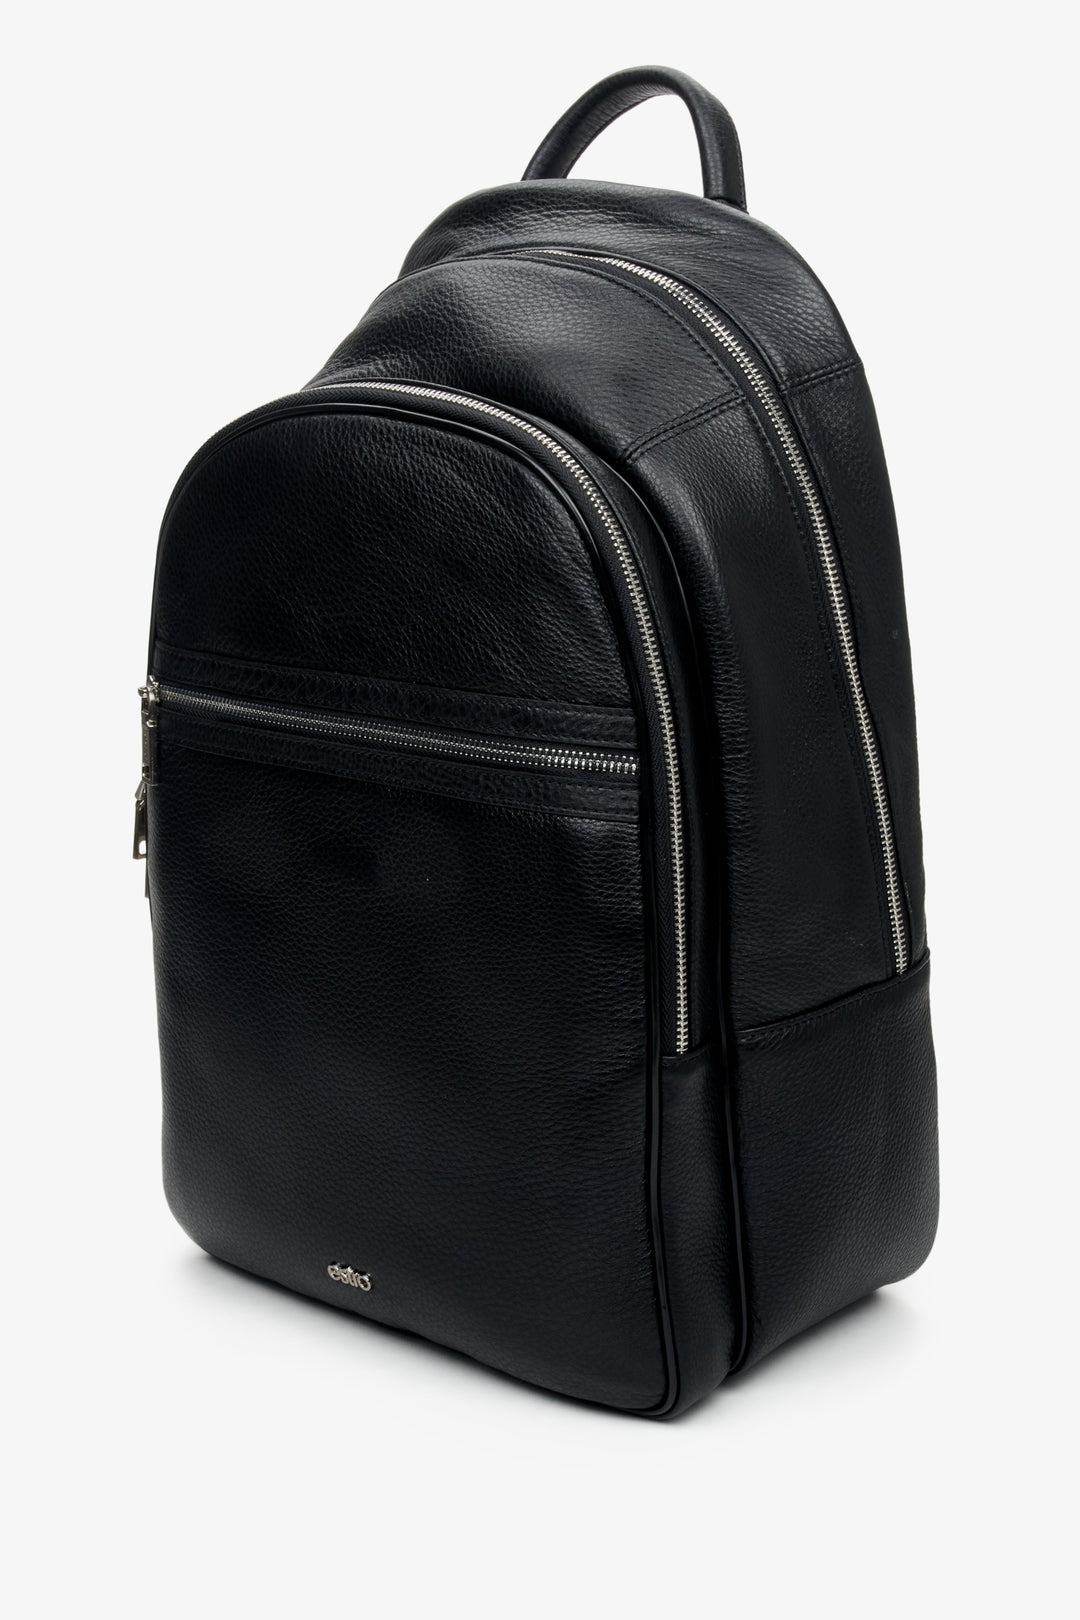 Men's black backpack made of genuine leather by Estro.